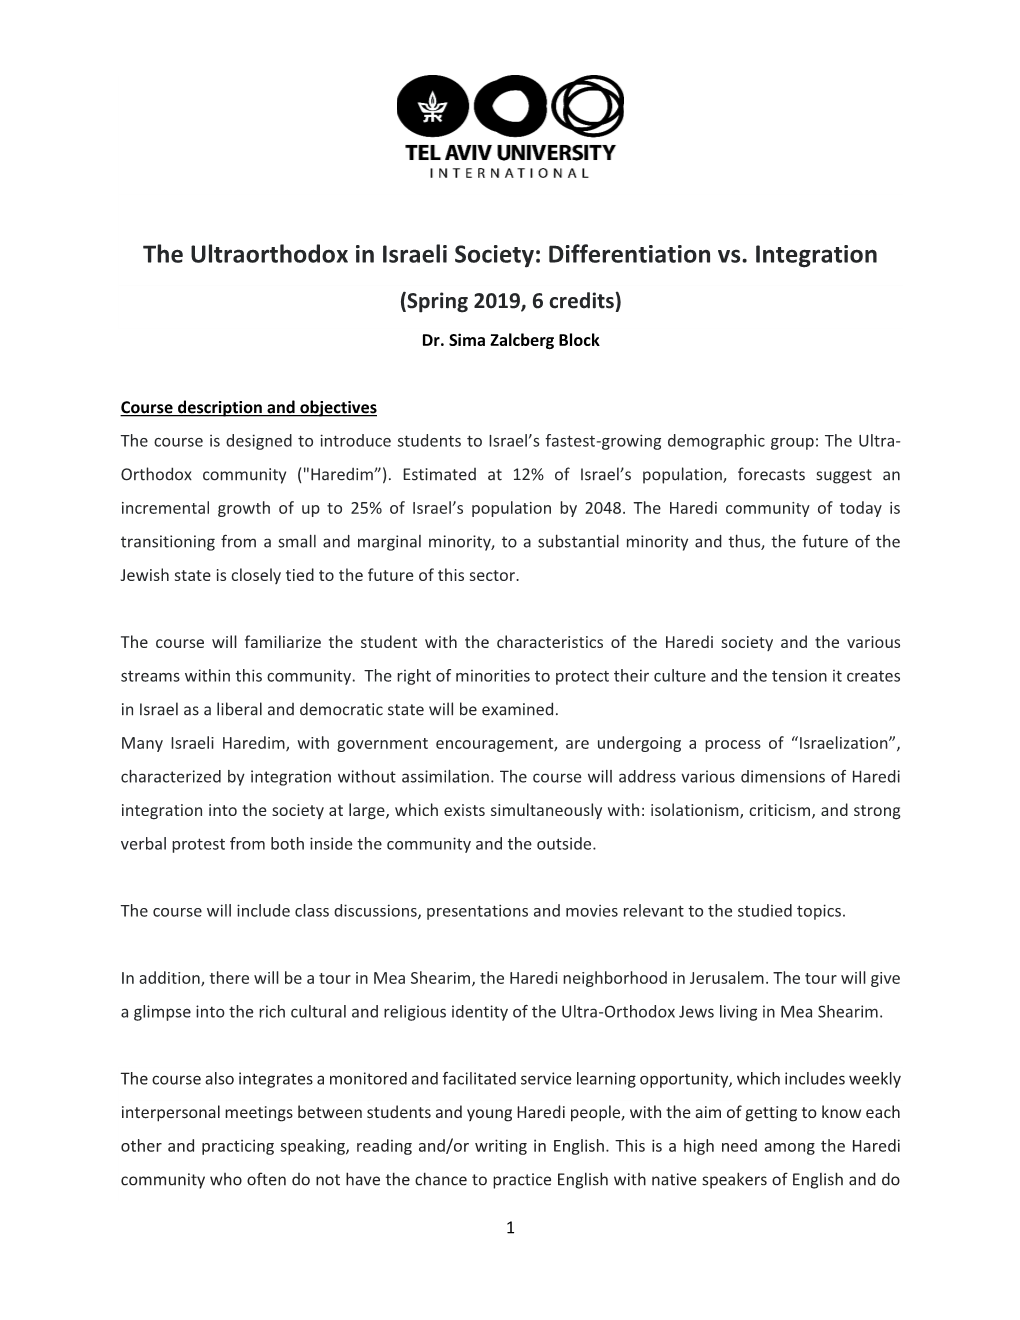 The Ultraorthodox in Israeli Society: Differentiation Vs. Integration (Spring 2019, 6 Credits) Dr